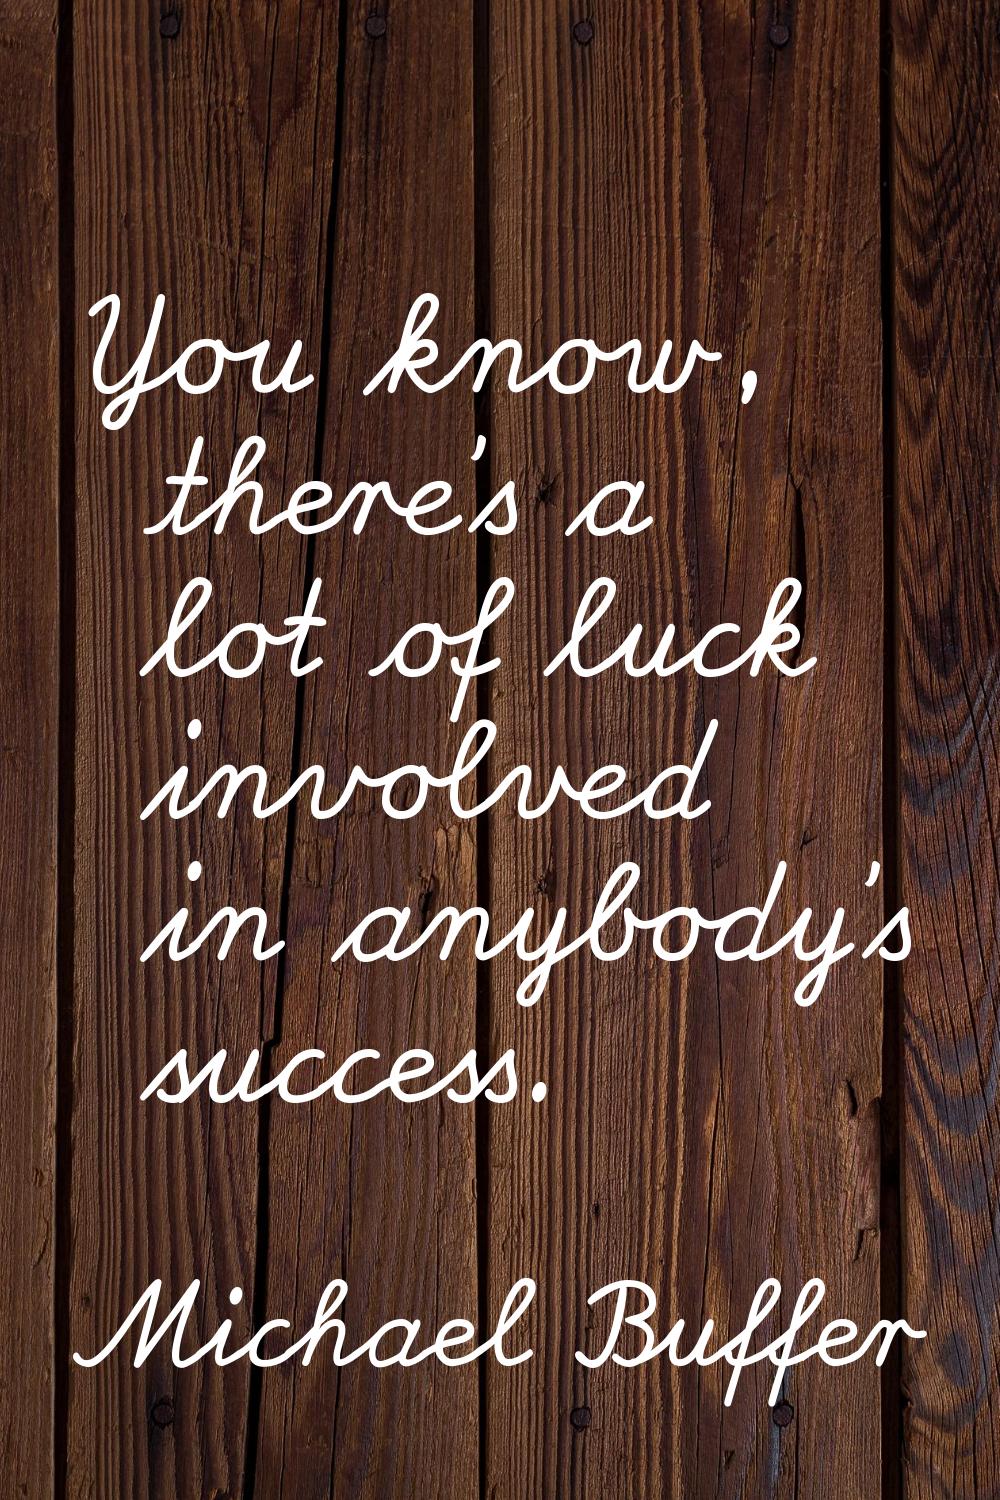 You know, there's a lot of luck involved in anybody's success.